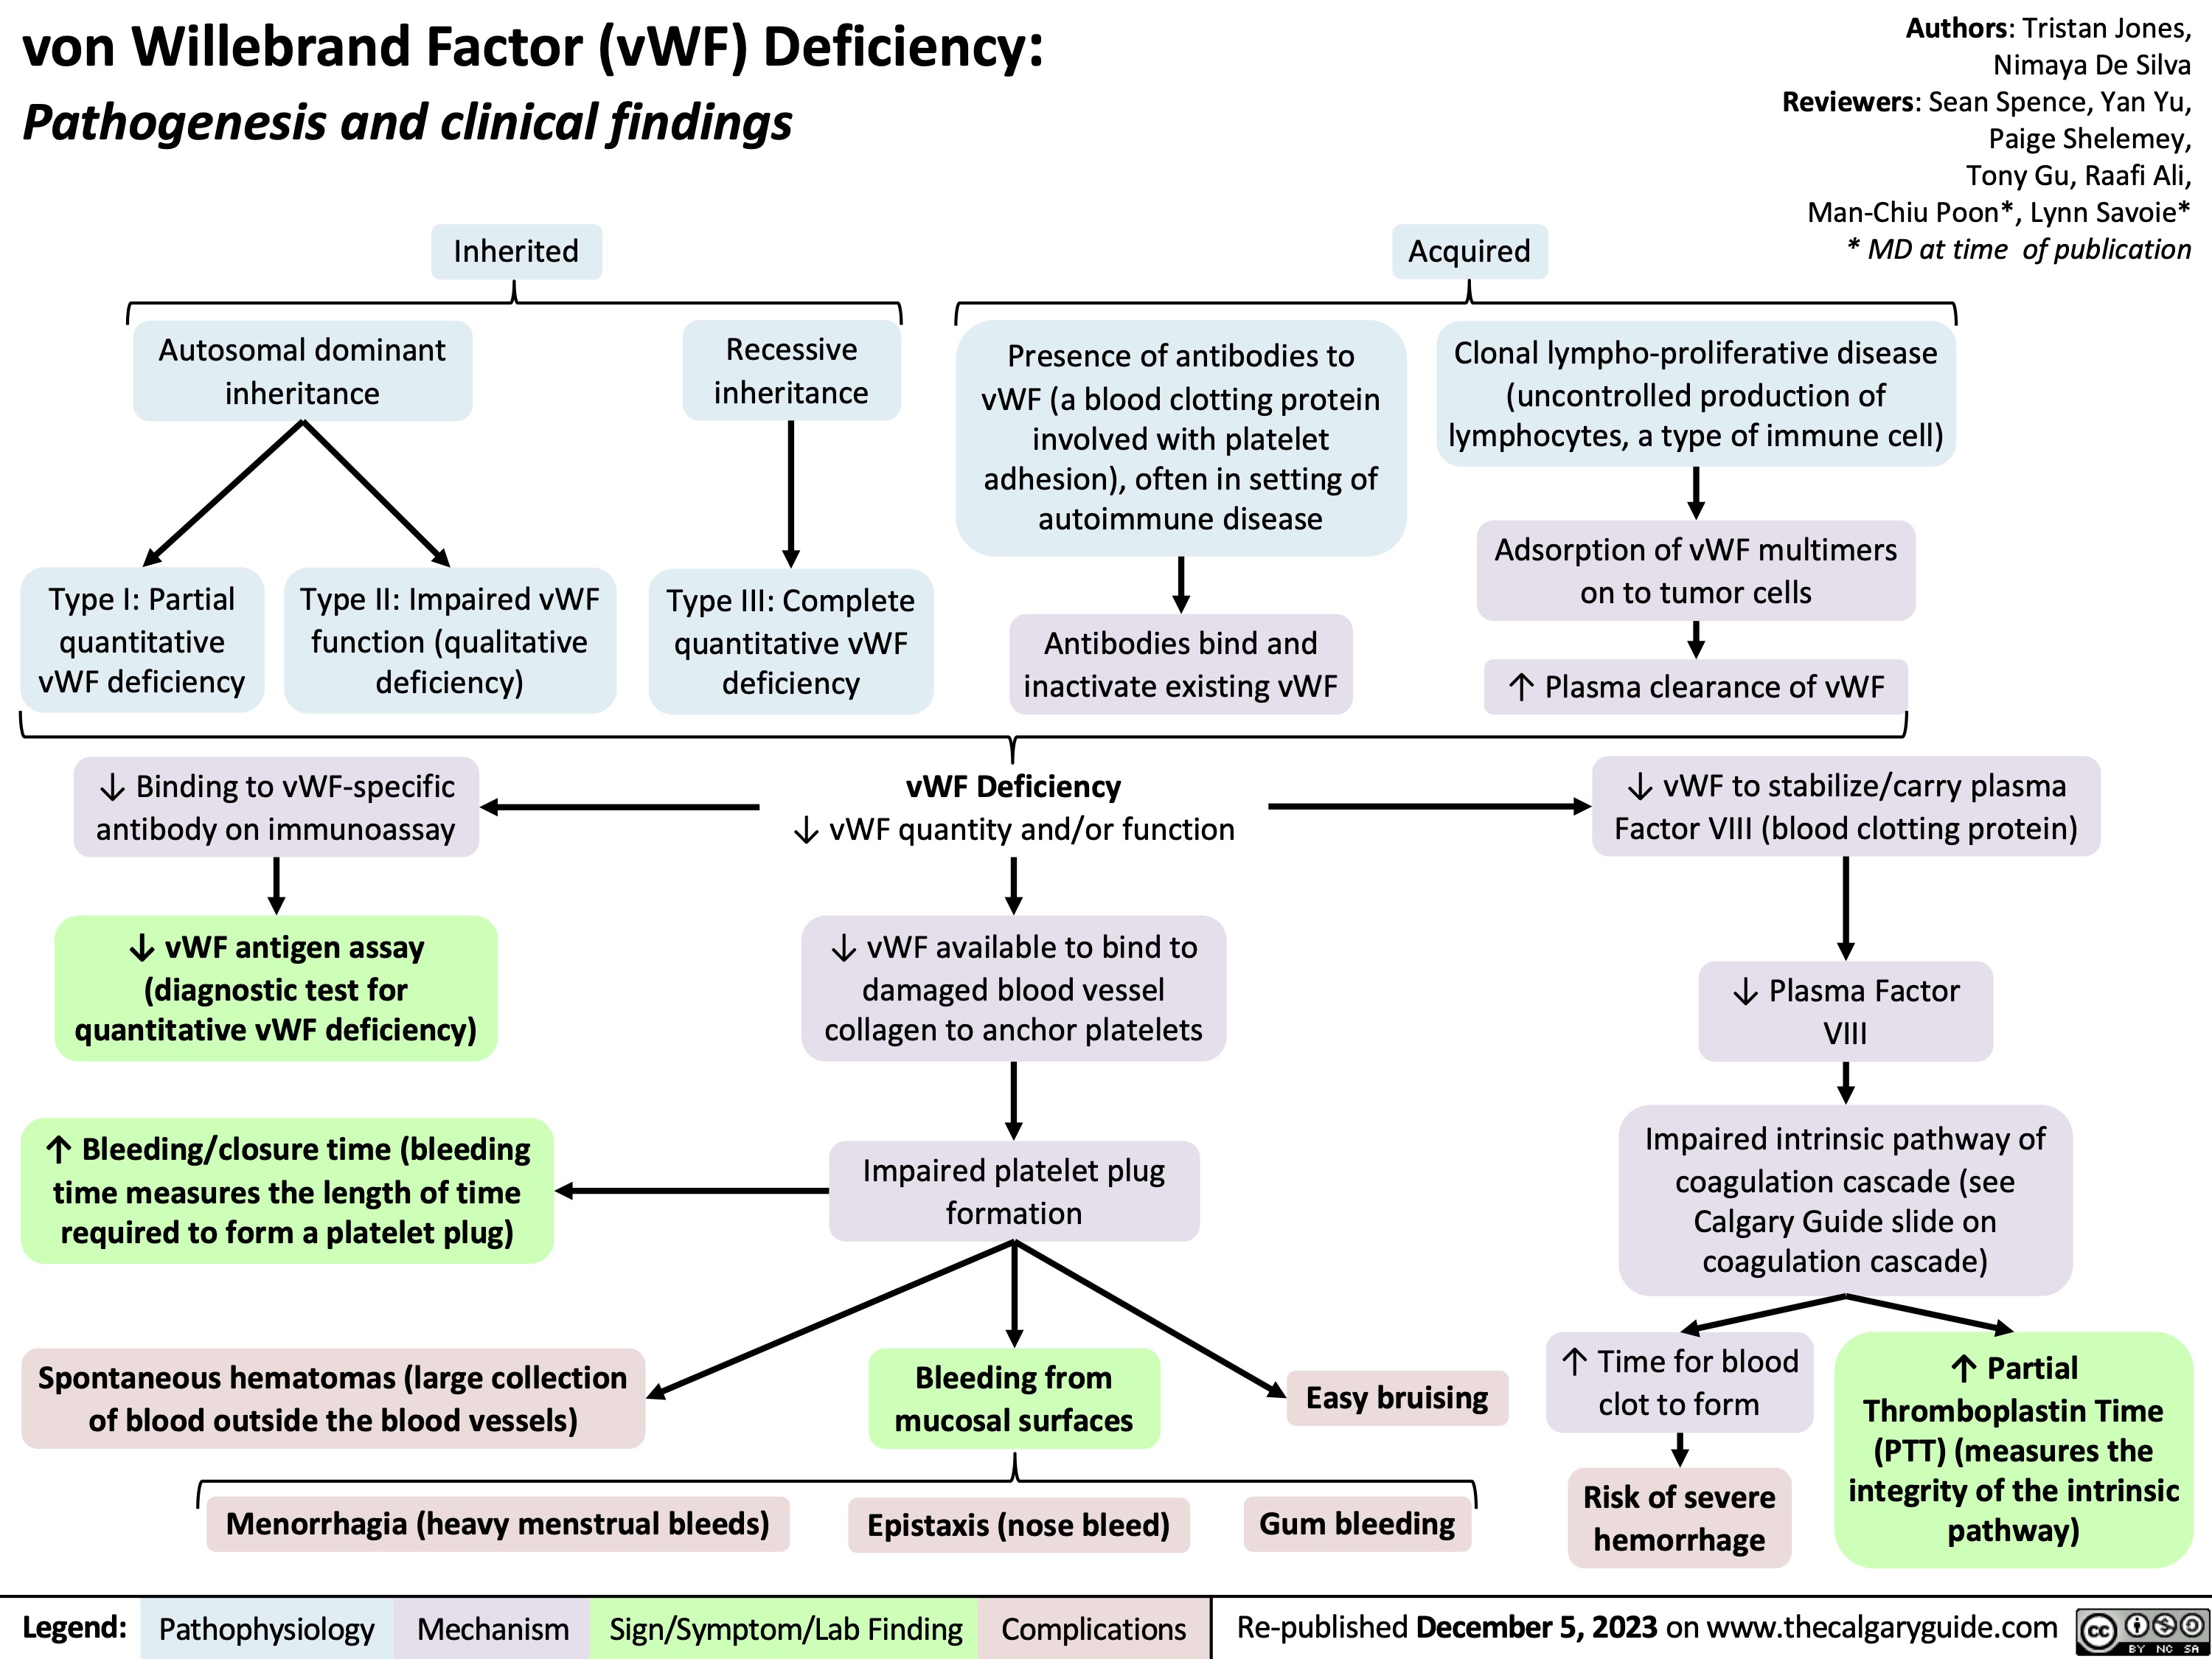 von Willebrand Factor (vWF) Deficiency:
Authors: Tristan Jones, Nimaya De Silva Reviewers: Sean Spence, Yan Yu, Paige Shelemey, Tony Gu, Raafi Ali, Man-Chiu Poon*, Lynn Savoie* * MD at time of publication
Pathogenesis and clinical findings
  Inherited
Acquired
      Autosomal dominant inheritance
Recessive inheritance
Type III: Complete quantitative vWF deficiency
Presence of antibodies to vWF (a blood clotting protein
involved with platelet adhesion), often in setting of autoimmune disease
Antibodies bind and inactivate existing vWF
Clonal lympho-proliferative disease (uncontrolled production of lymphocytes, a type of immune cell)
Adsorption of vWF multimers on to tumor cells
↑ Plasma clearance of vWF
↓ vWF to stabilize/carry plasma Factor VIII (blood clotting protein)
↓ Plasma Factor VIII
Impaired intrinsic pathway of coagulation cascade (see Calgary Guide slide on coagulation cascade)
      Type I: Partial quantitative vWF deficiency
Type II: Impaired vWF function (qualitative deficiency)
     ↓ Binding to vWF-specific antibody on immunoassay
↓ vWF antigen assay (diagnostic test for quantitative vWF deficiency)
↑ Bleeding/closure time (bleeding time measures the length of time required to form a platelet plug)
Spontaneous hematomas (large collection of blood outside the blood vessels)
Menorrhagia (heavy menstrual bleeds)
vWF Deficiency
↓ vWF quantity and/or function
↓ vWF available to bind to damaged blood vessel collagen to anchor platelets
Impaired platelet plug formation
Bleeding from mucosal surfaces
Easy bruising
Gum bleeding
↑ Time for blood clot to form
Risk of severe hemorrhage
↑ Partial Thromboplastin Time (PTT) (measures the integrity of the intrinsic pathway)
                         Epistaxis (nose bleed)
 Legend:
 Pathophysiology
Mechanism
Sign/Symptom/Lab Finding
 Complications
Re-published December 5, 2023 on www.thecalgaryguide.com
    